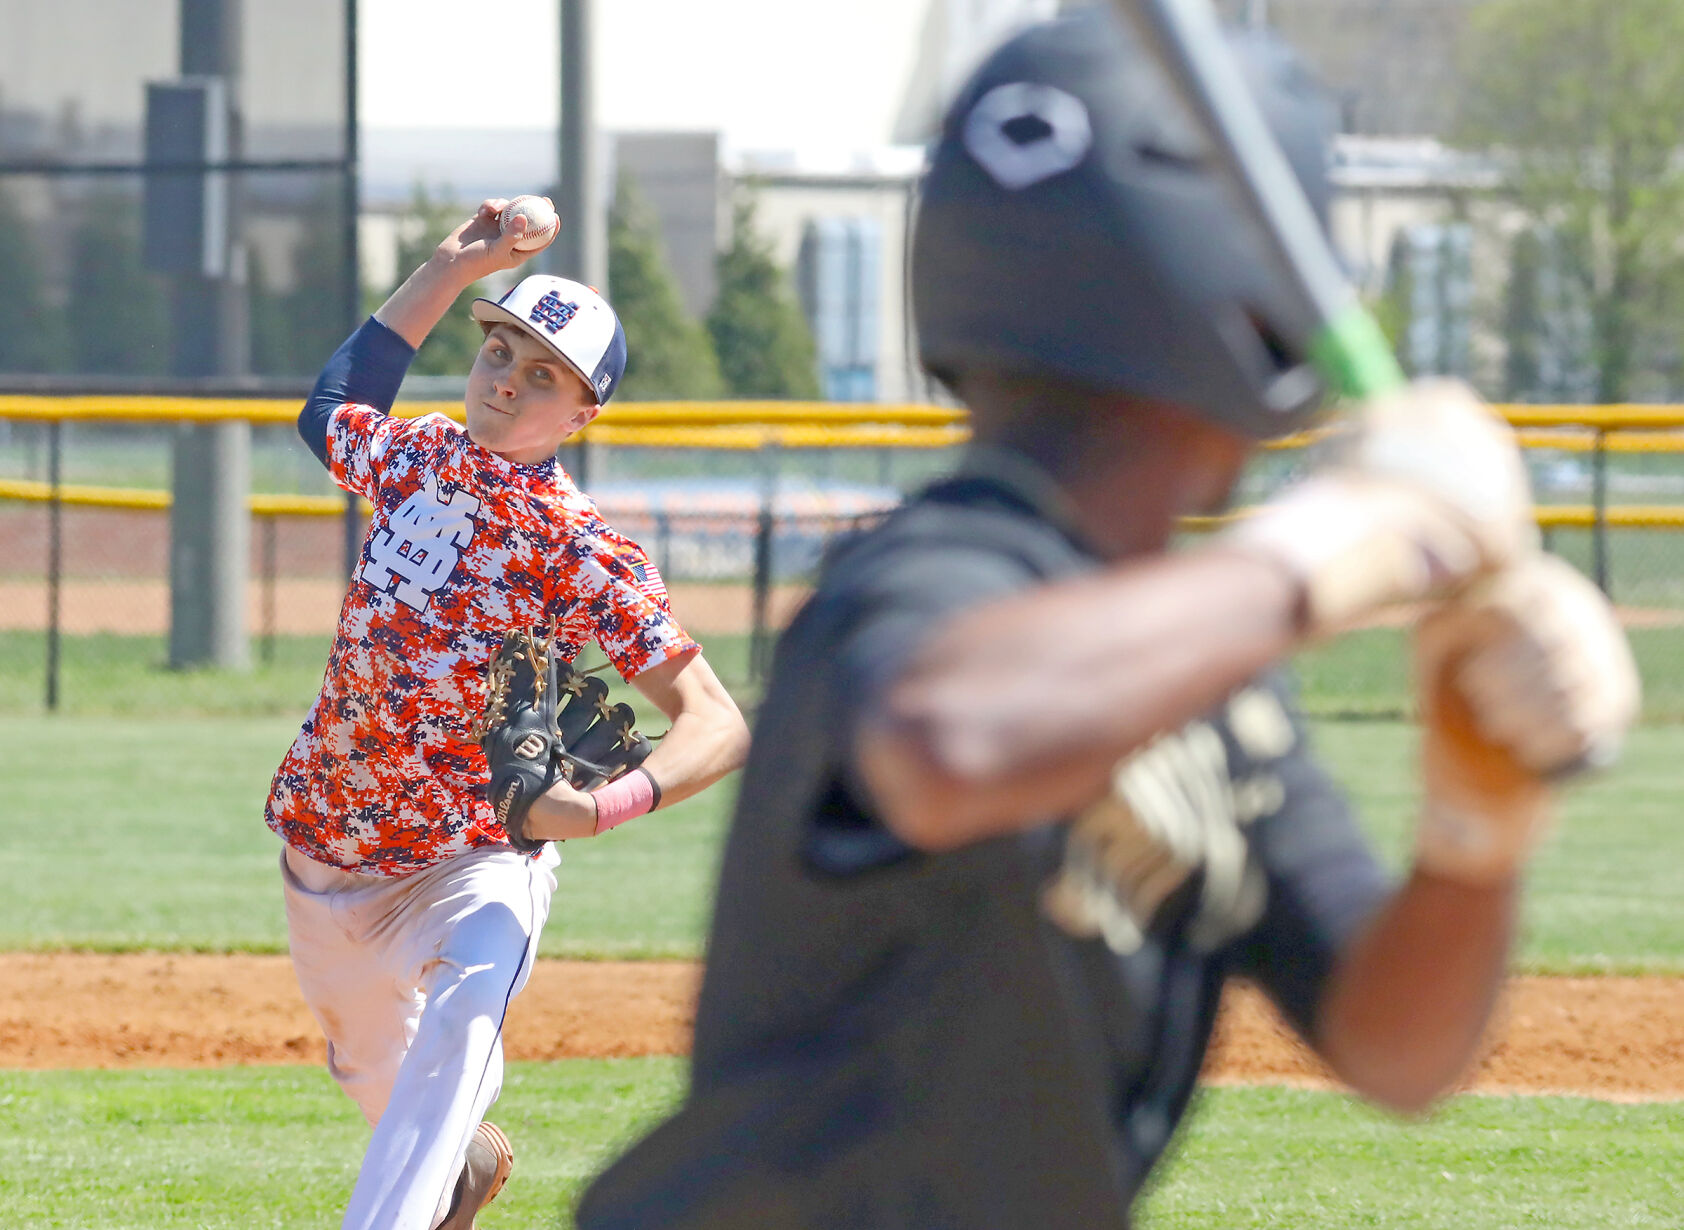 HIGH SCHOOL BASEBALL: Eagles rally for win at home